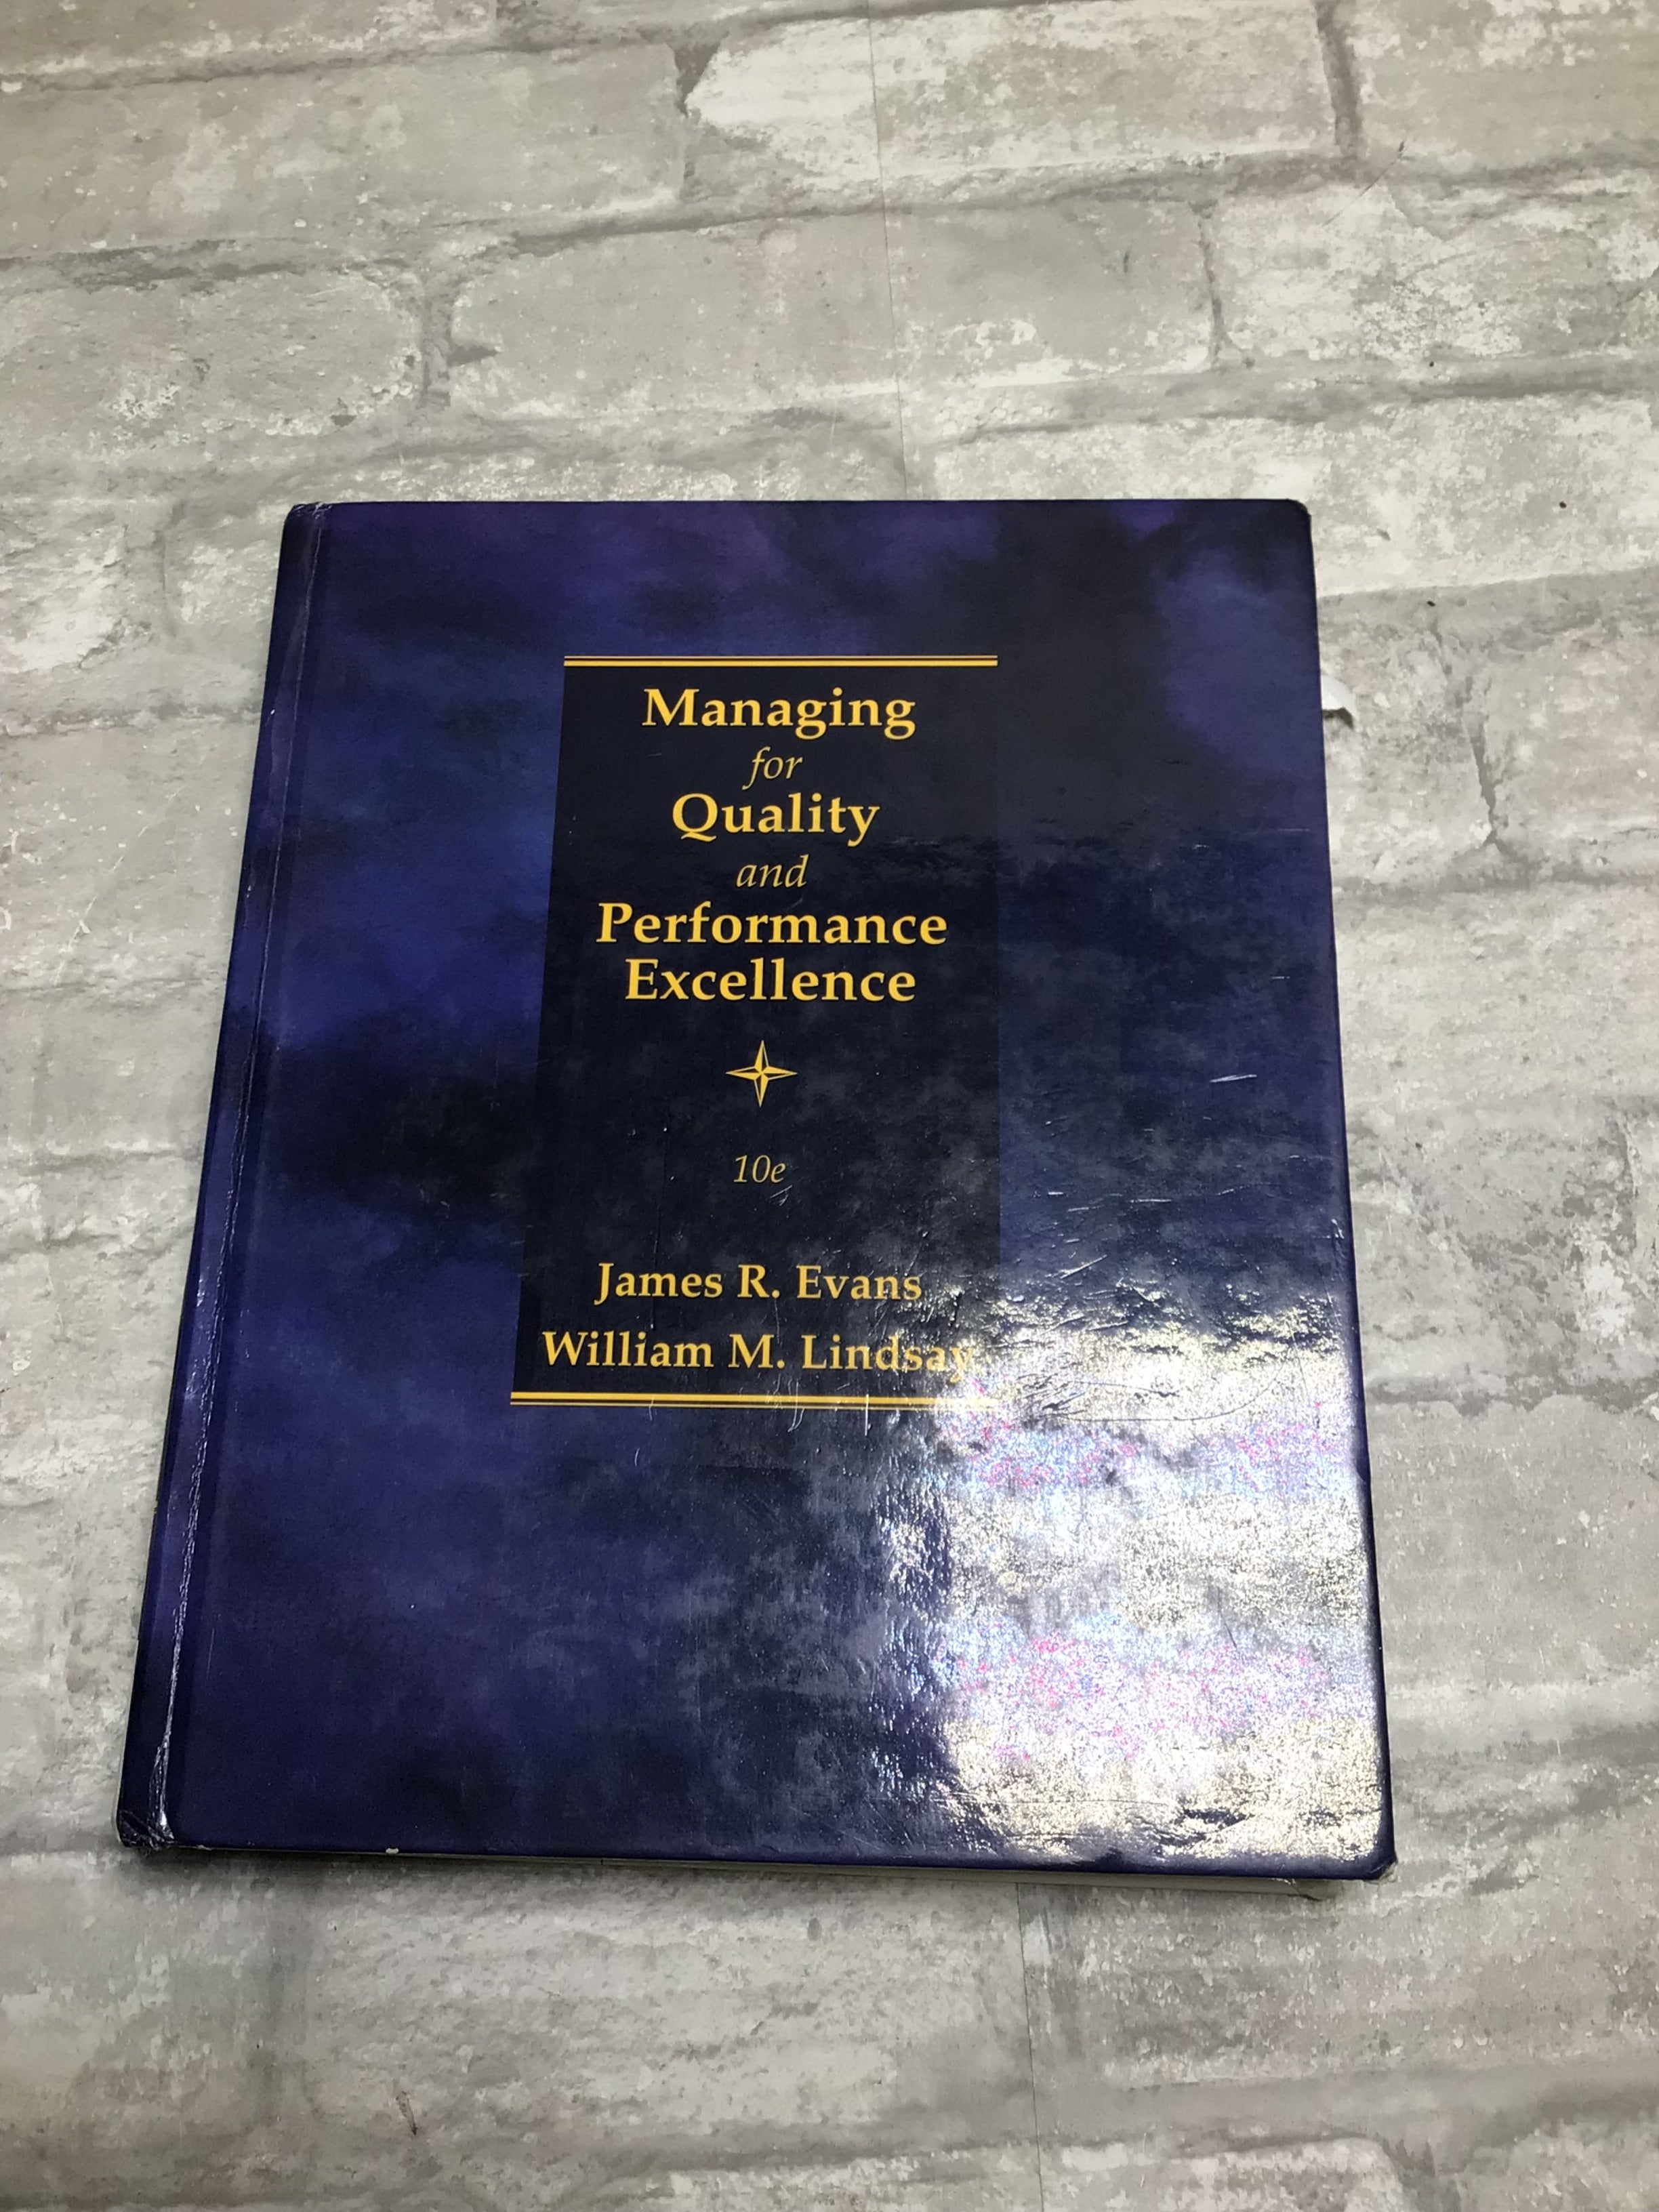 Managing for Quality and Performance Excellence 10th Edition (8207502278894)